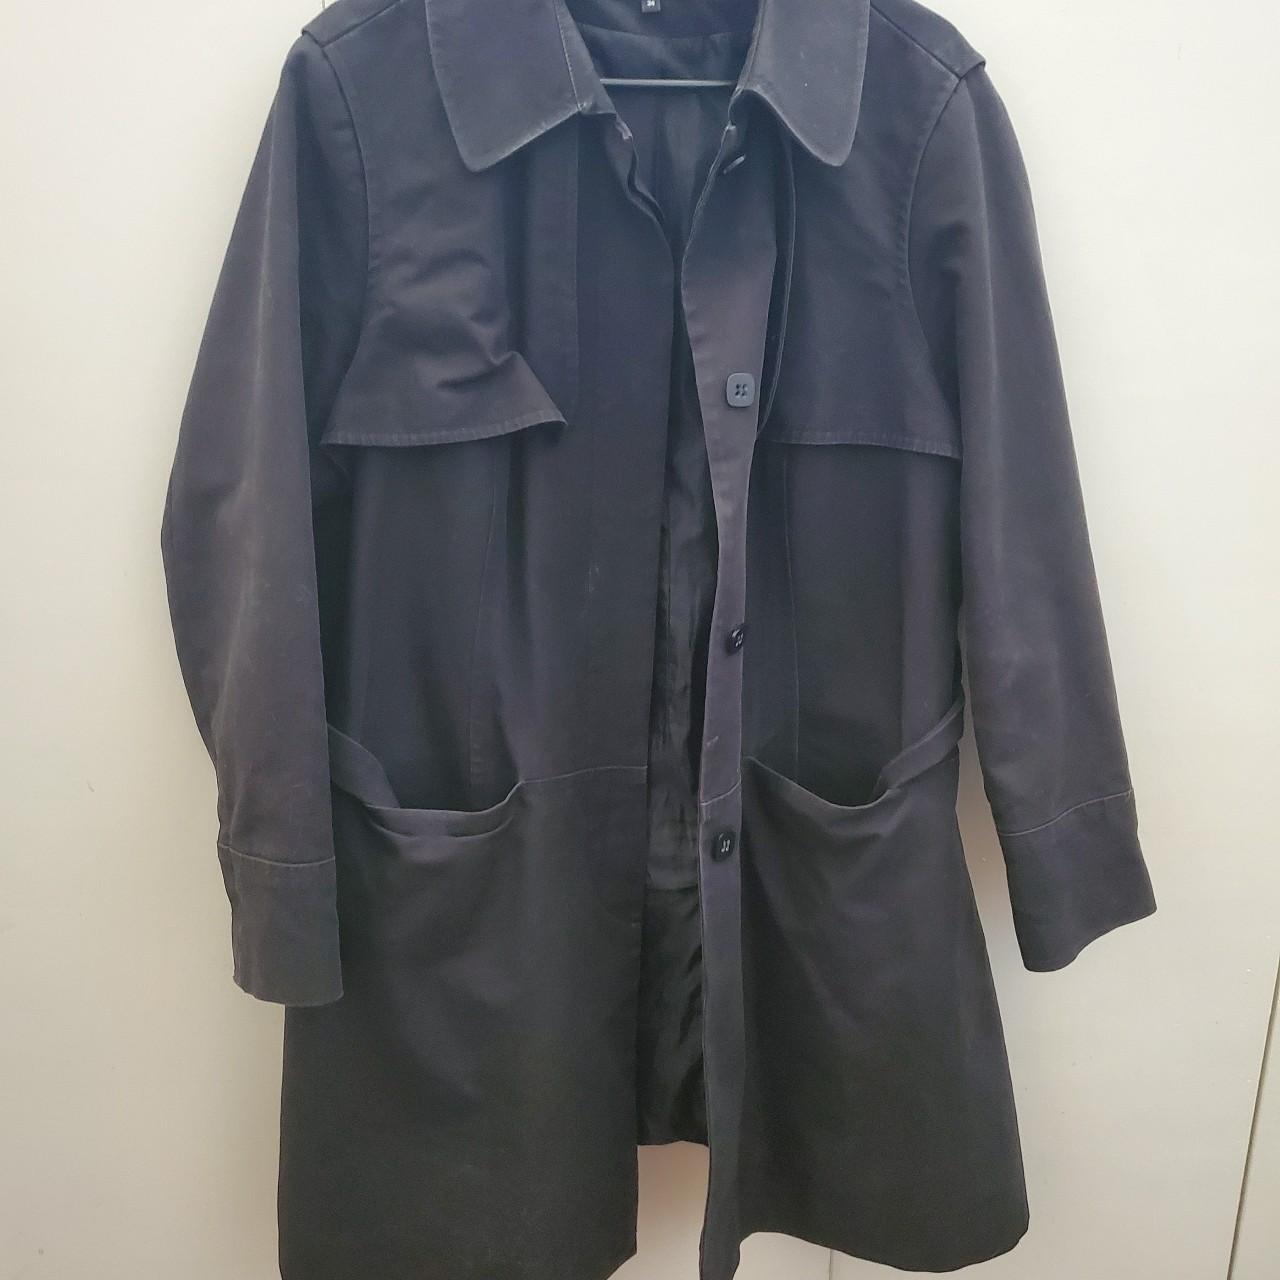 A Marks and Spencer black trench coat in Good Used... - Depop